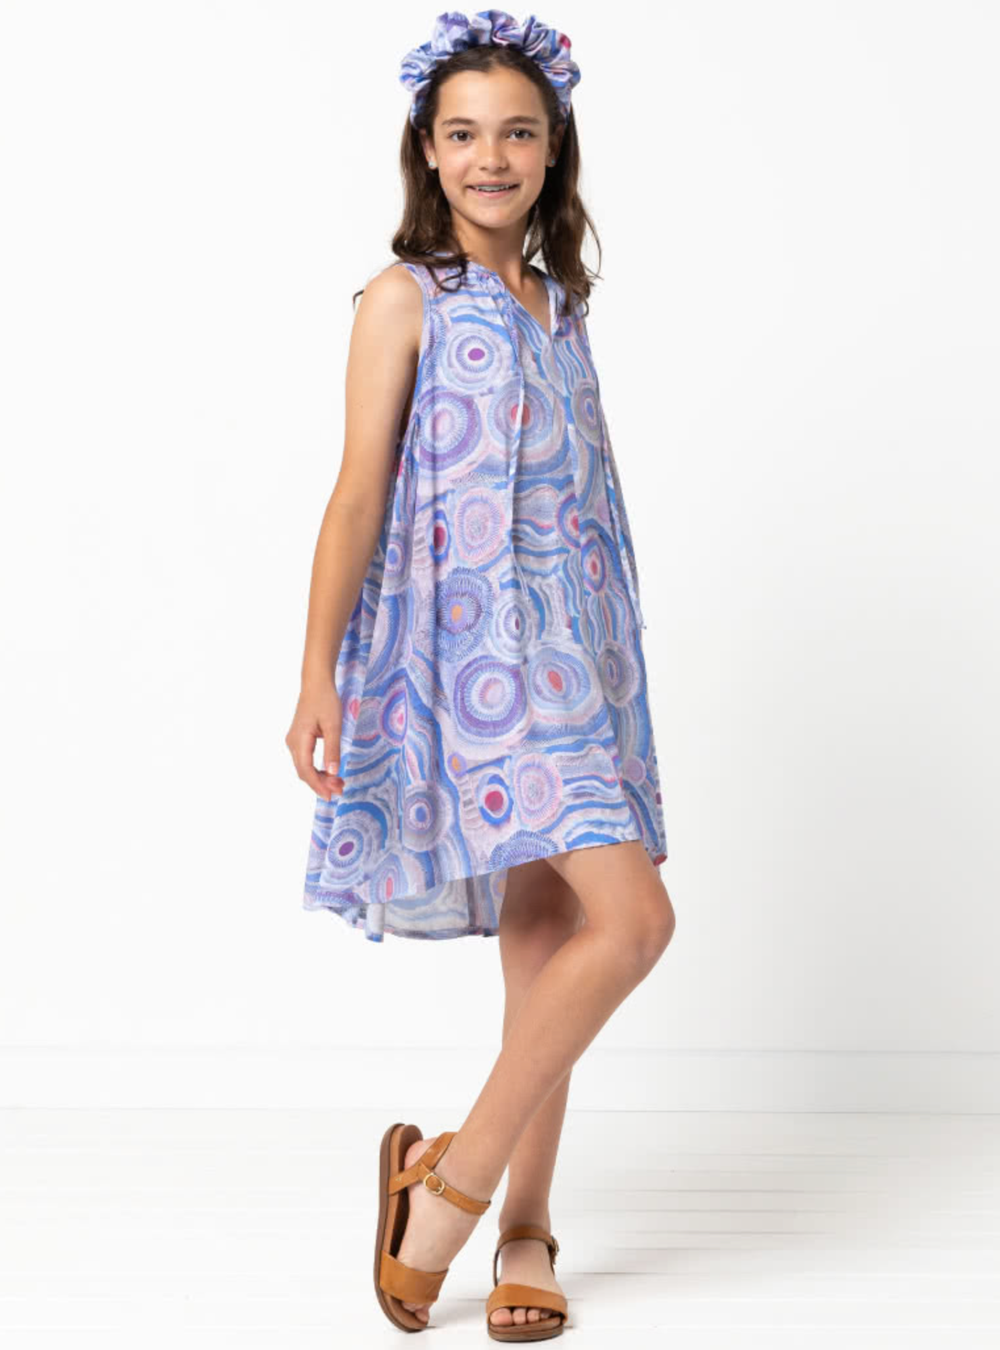 Child wearing the Child/Teen Heidi Dress sewing pattern from Style Arc on The Fold Line. A dress pattern made in rayon, silk, or voile fabrics, featuring a free-flowing style, neckline gathers, front neck ties, deep gathered armholes and a high-low hemlin